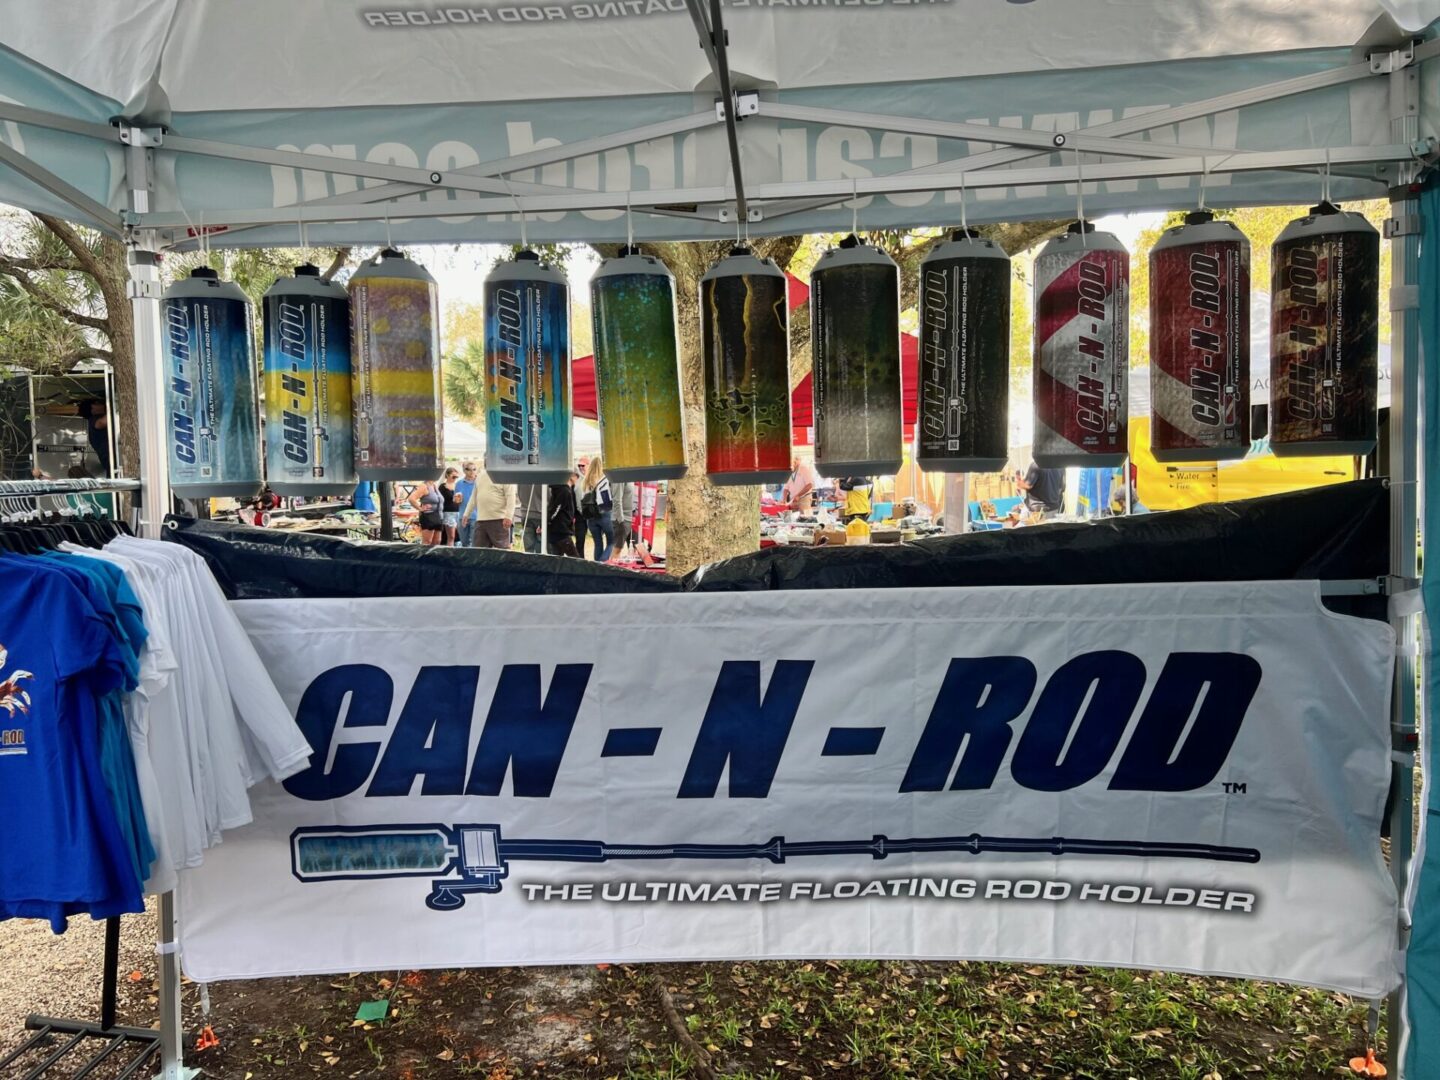 A can-n-rod tent with many cans hanging from the side.